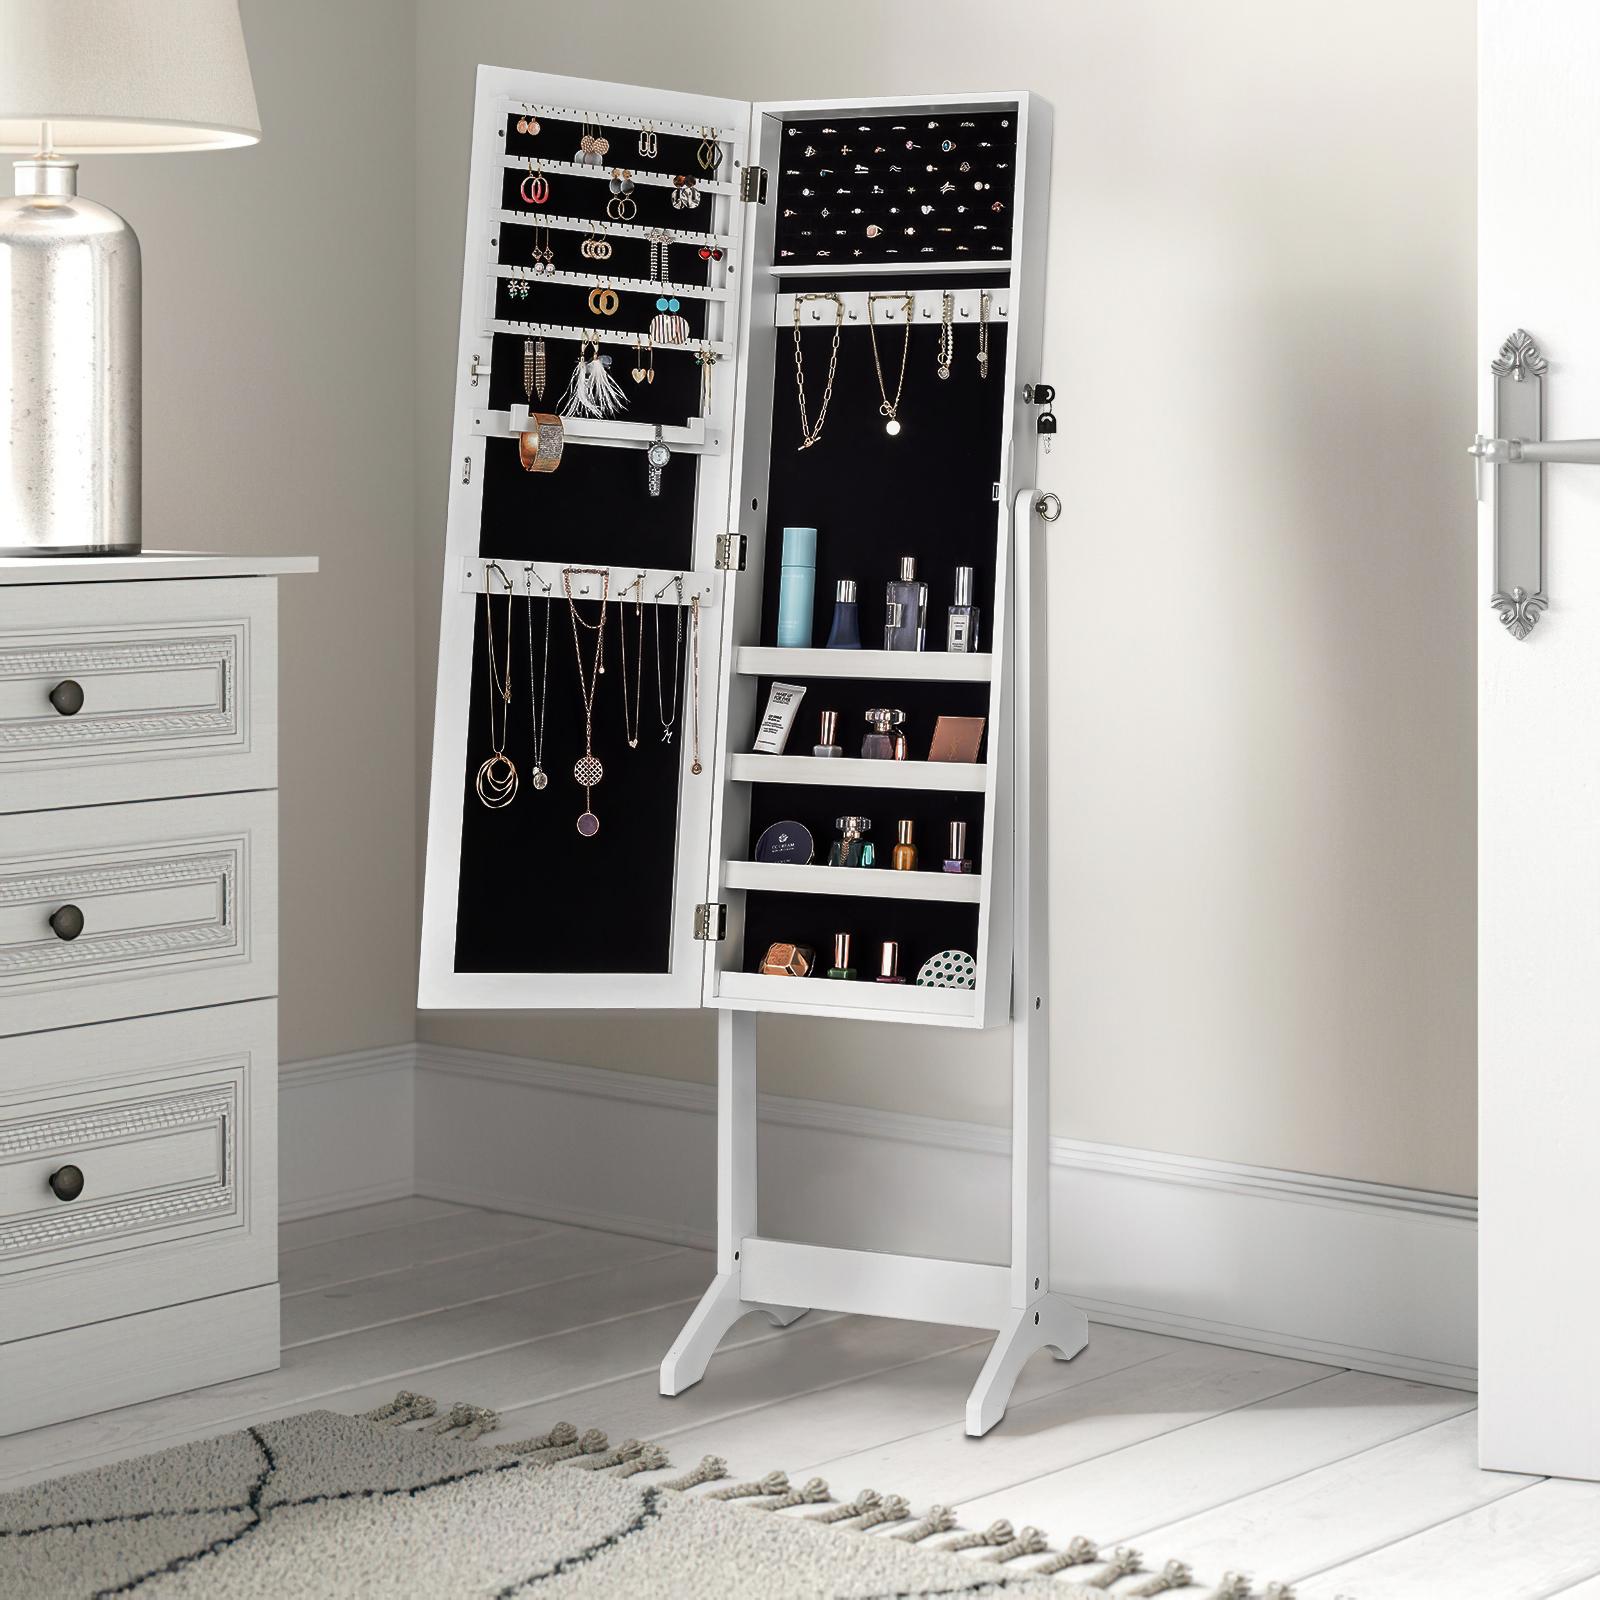 ViscoLogic Evie Jewelry Armoire Makeup Mirrored Storage Cabinet for Cosmetics, Jewelry, Lockable Cabinet and Organizer With Dressing Mirror (White)